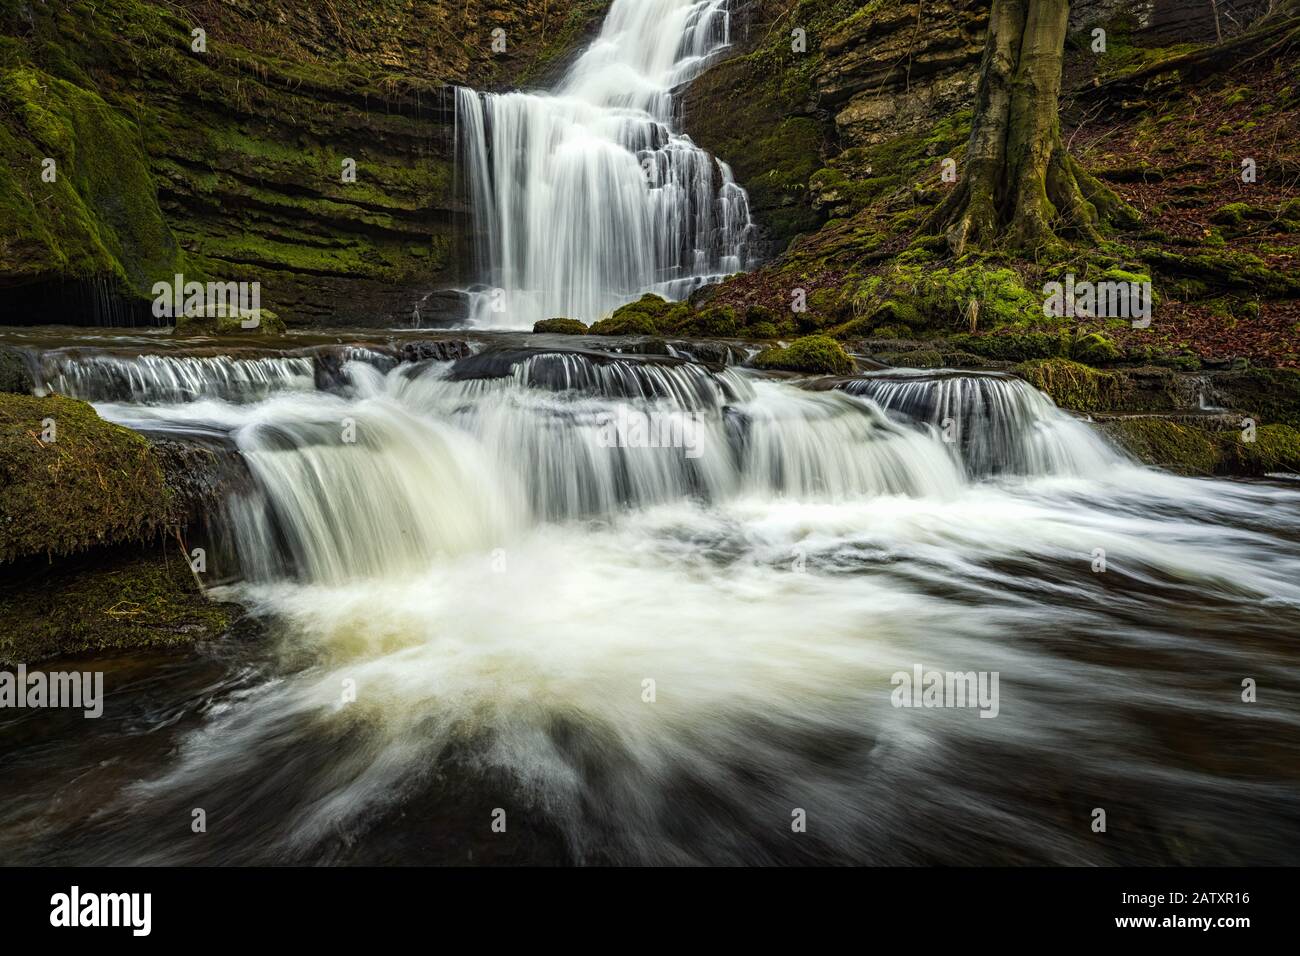 Scaleber Force Waterfall near Settle In The Yorkshire Dales National Park, UK Stock Photo